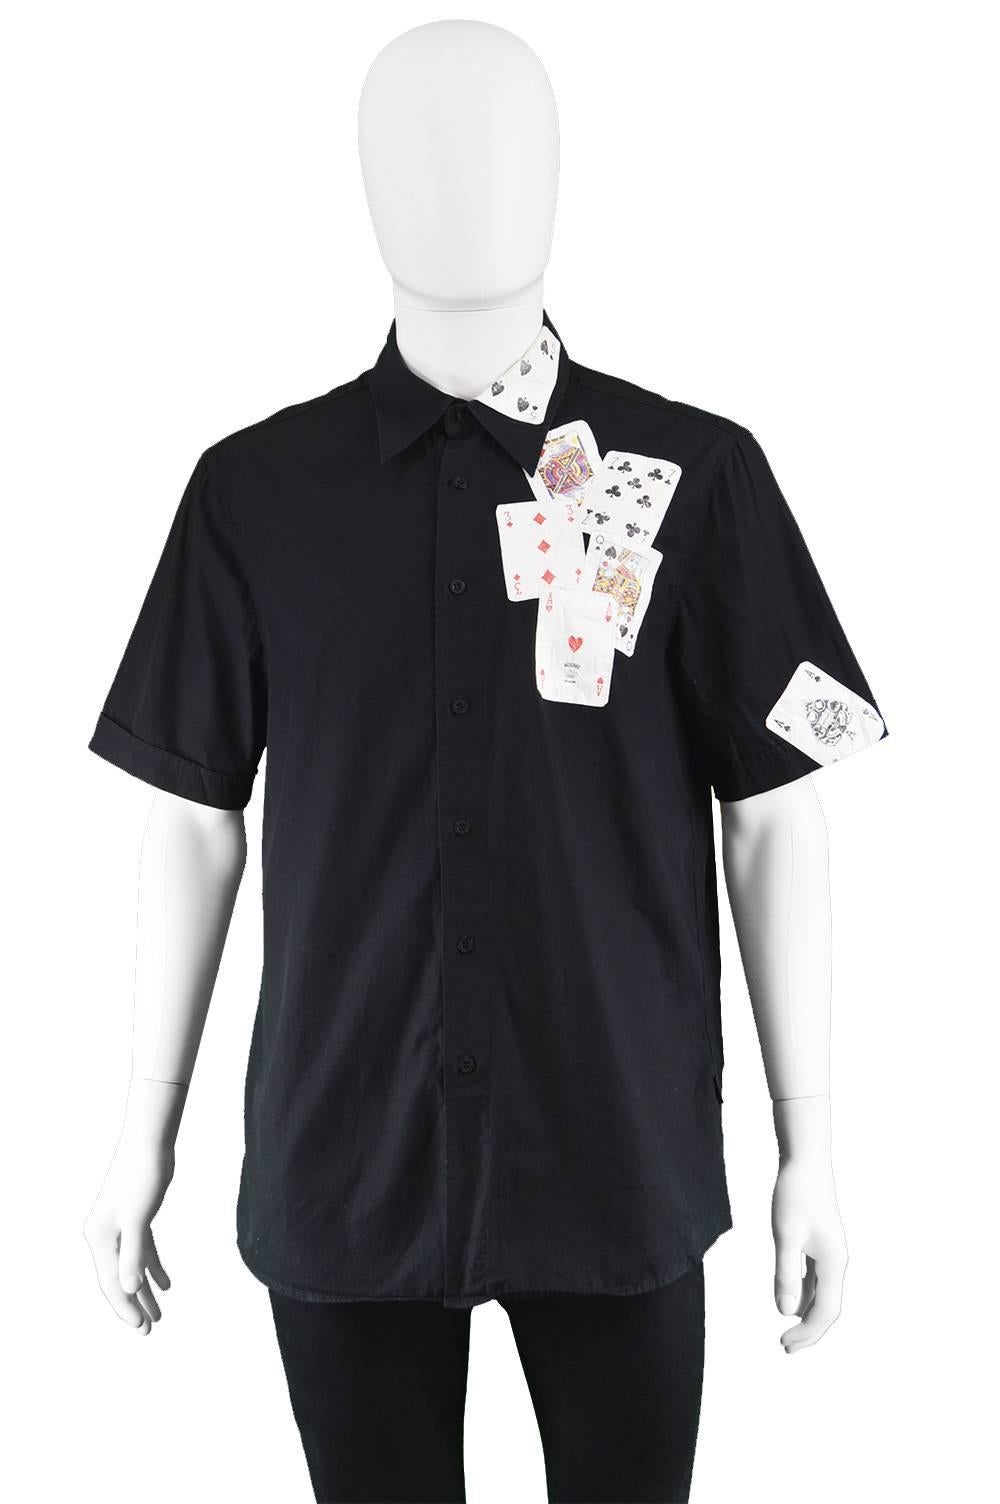 Moschino Men's Black Cotton Playing Card Short Sleeve Shirt

Size: Marked L
Chest - 42” / 106cm
Length (Shoulder to Hem) - 27” / 68cm
Shoulder to Shoulder - 19” / 48cm
Sleeve Pit to Cuff - 5” / 12cm
Sleeve Shoulder to Cuff - 10” / 25cm

Condition: